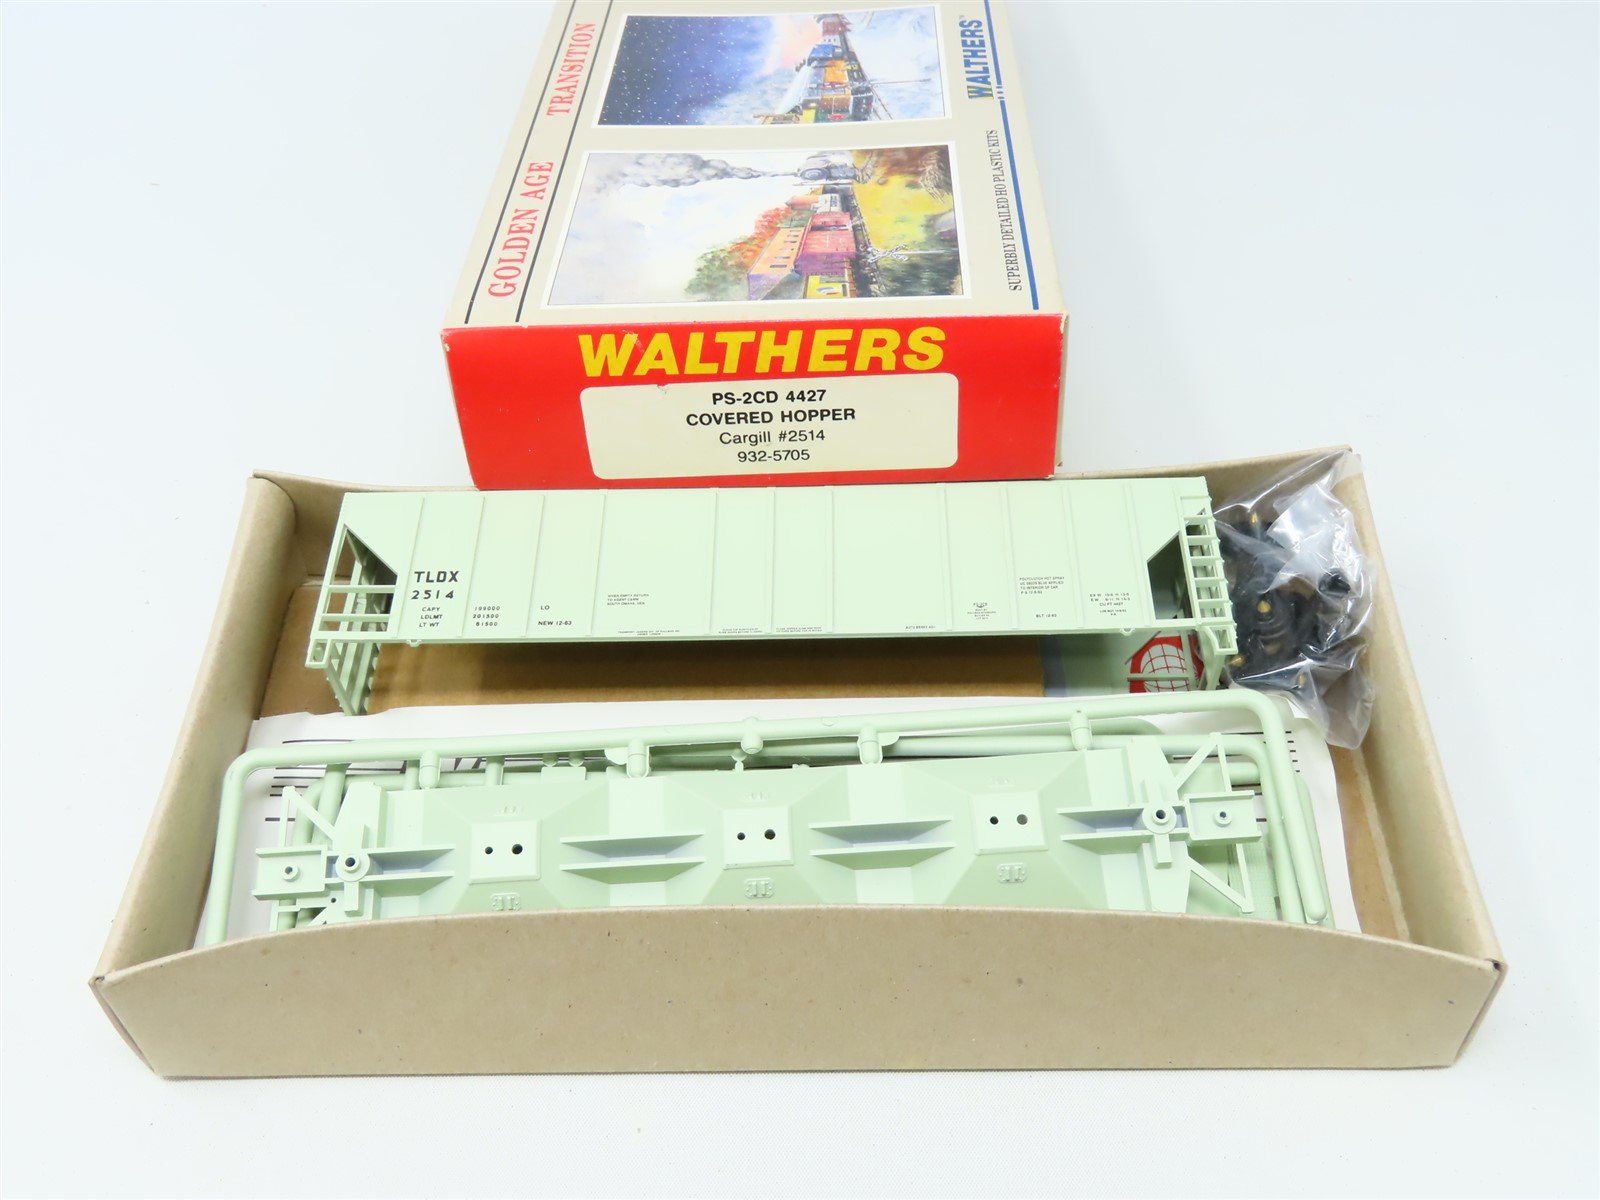 HO Scale Walthers Kit 932-5705 TLDX Cargill 3-Bay Covered Hopper #2514